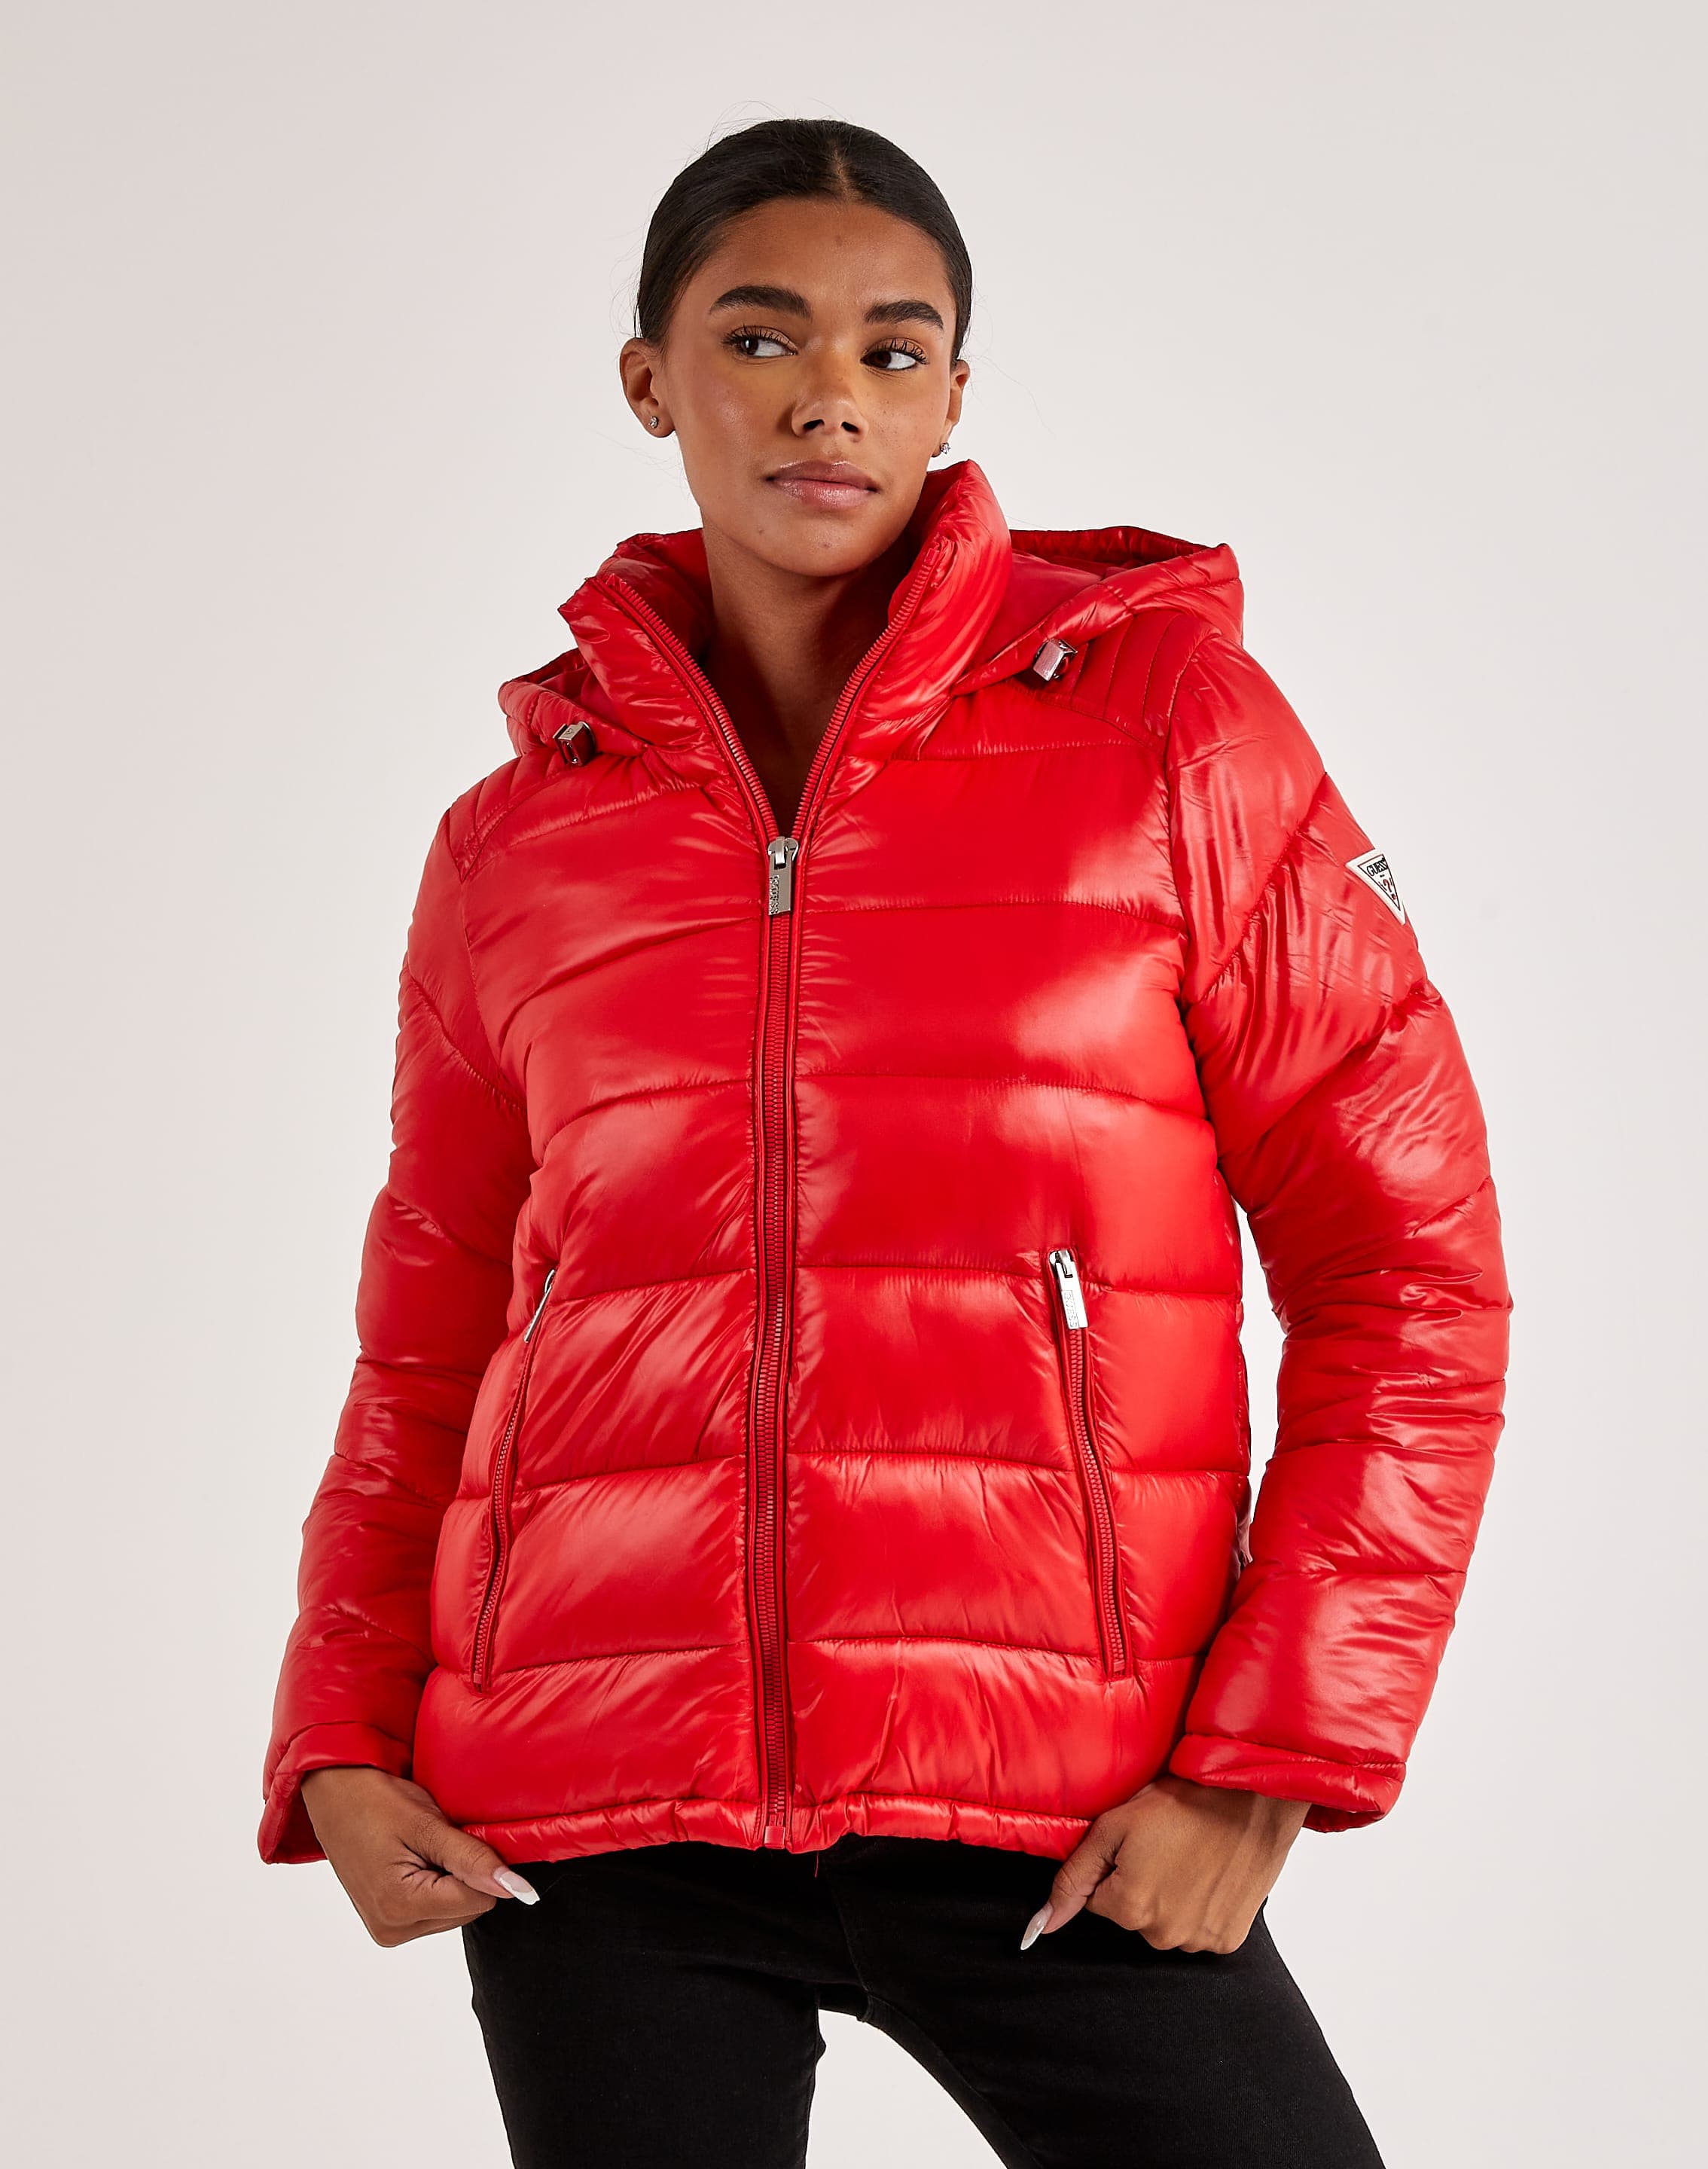 Guess Hooded Puffer Jacket – DTLR